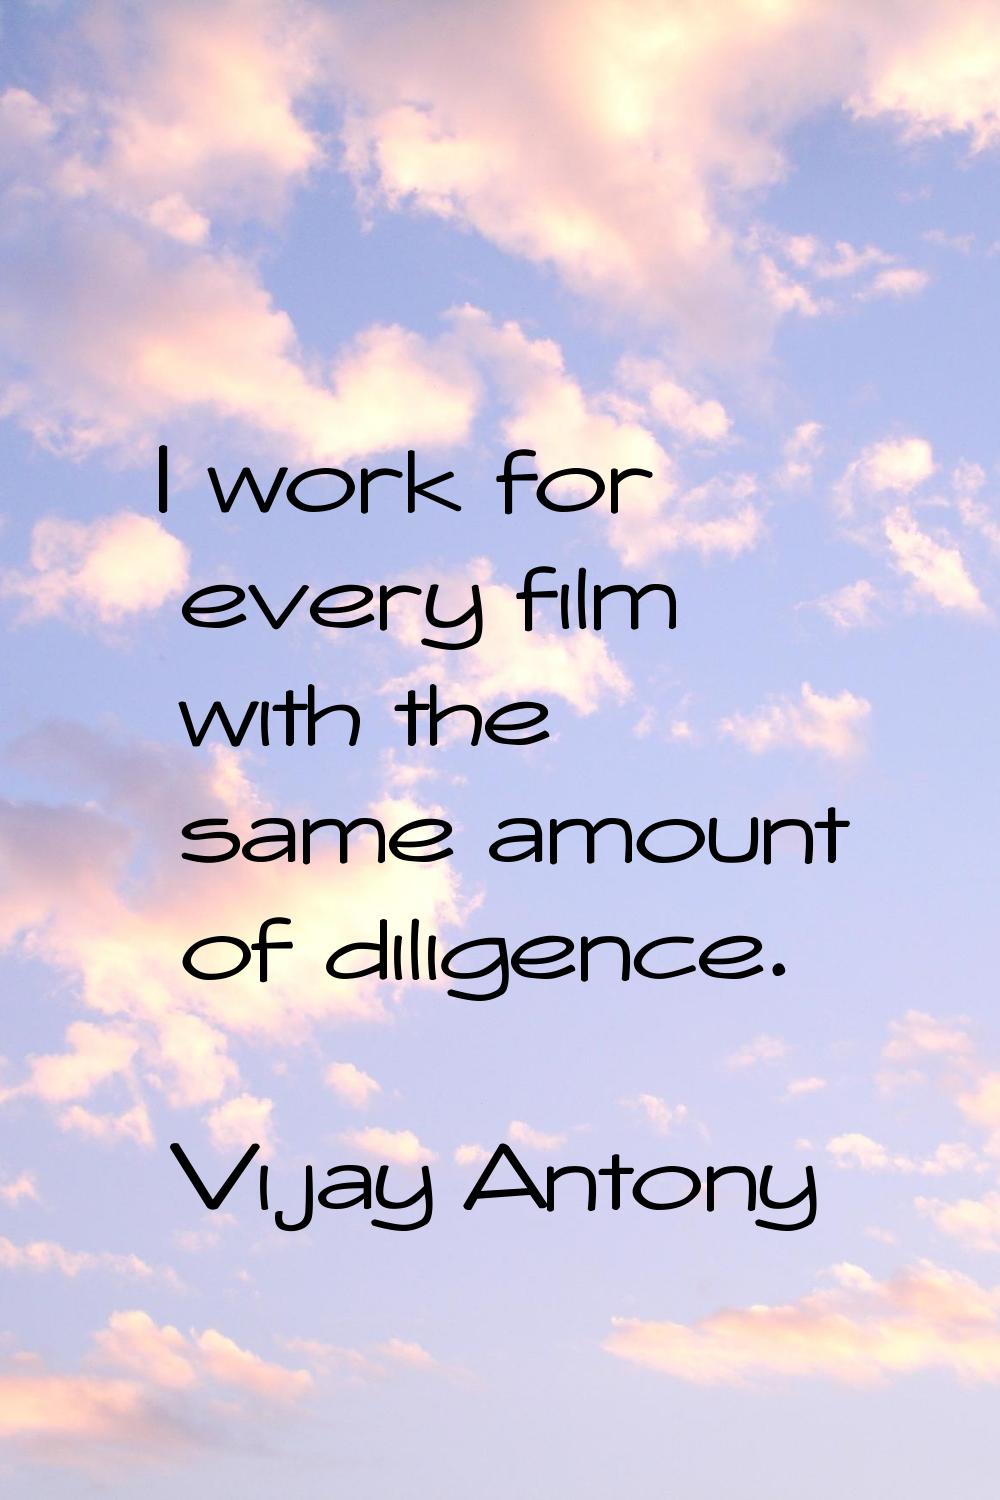 I work for every film with the same amount of diligence.